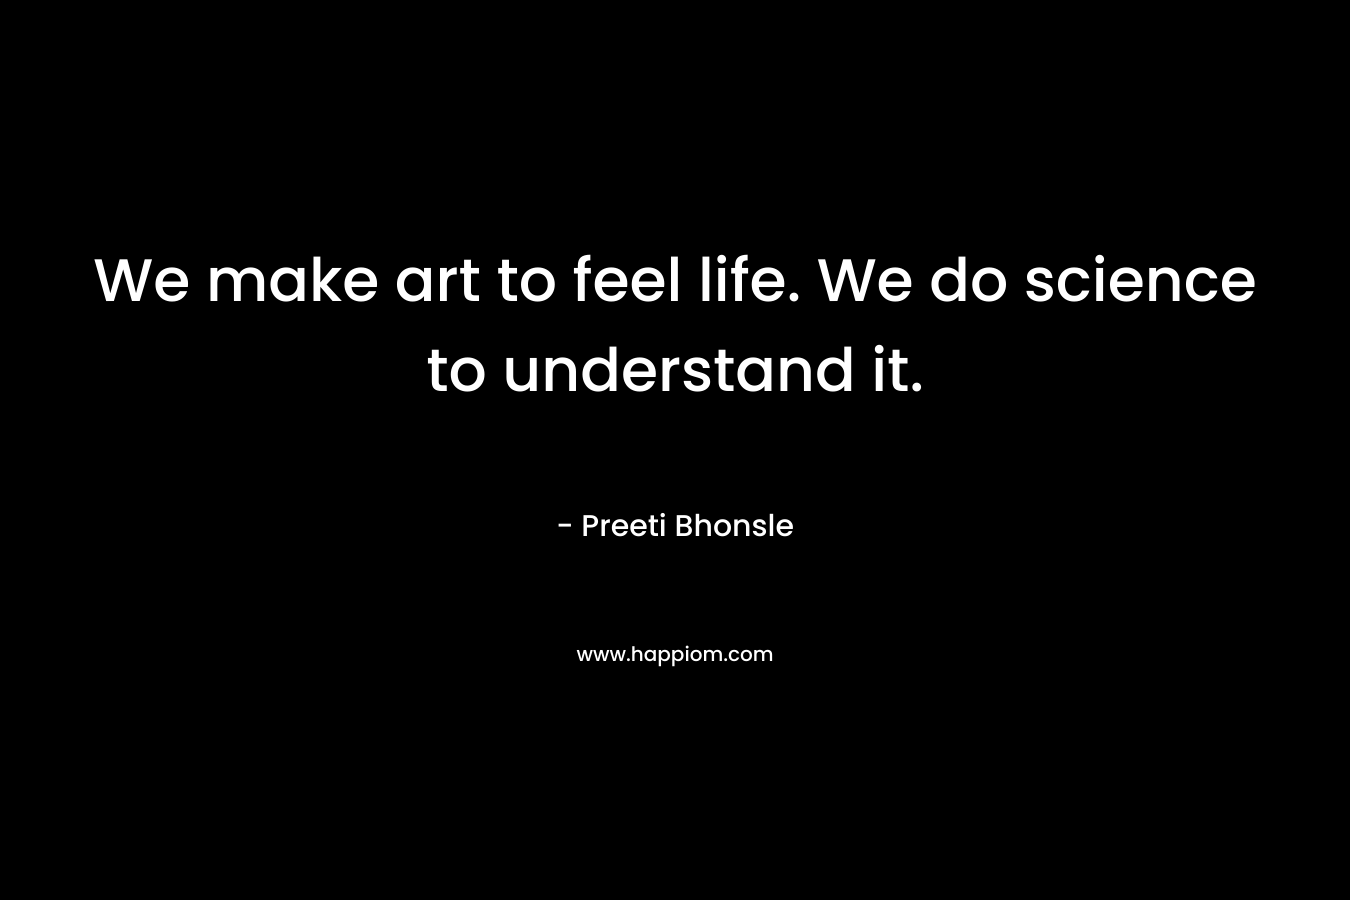 We make art to feel life. We do science to understand it. – Preeti Bhonsle